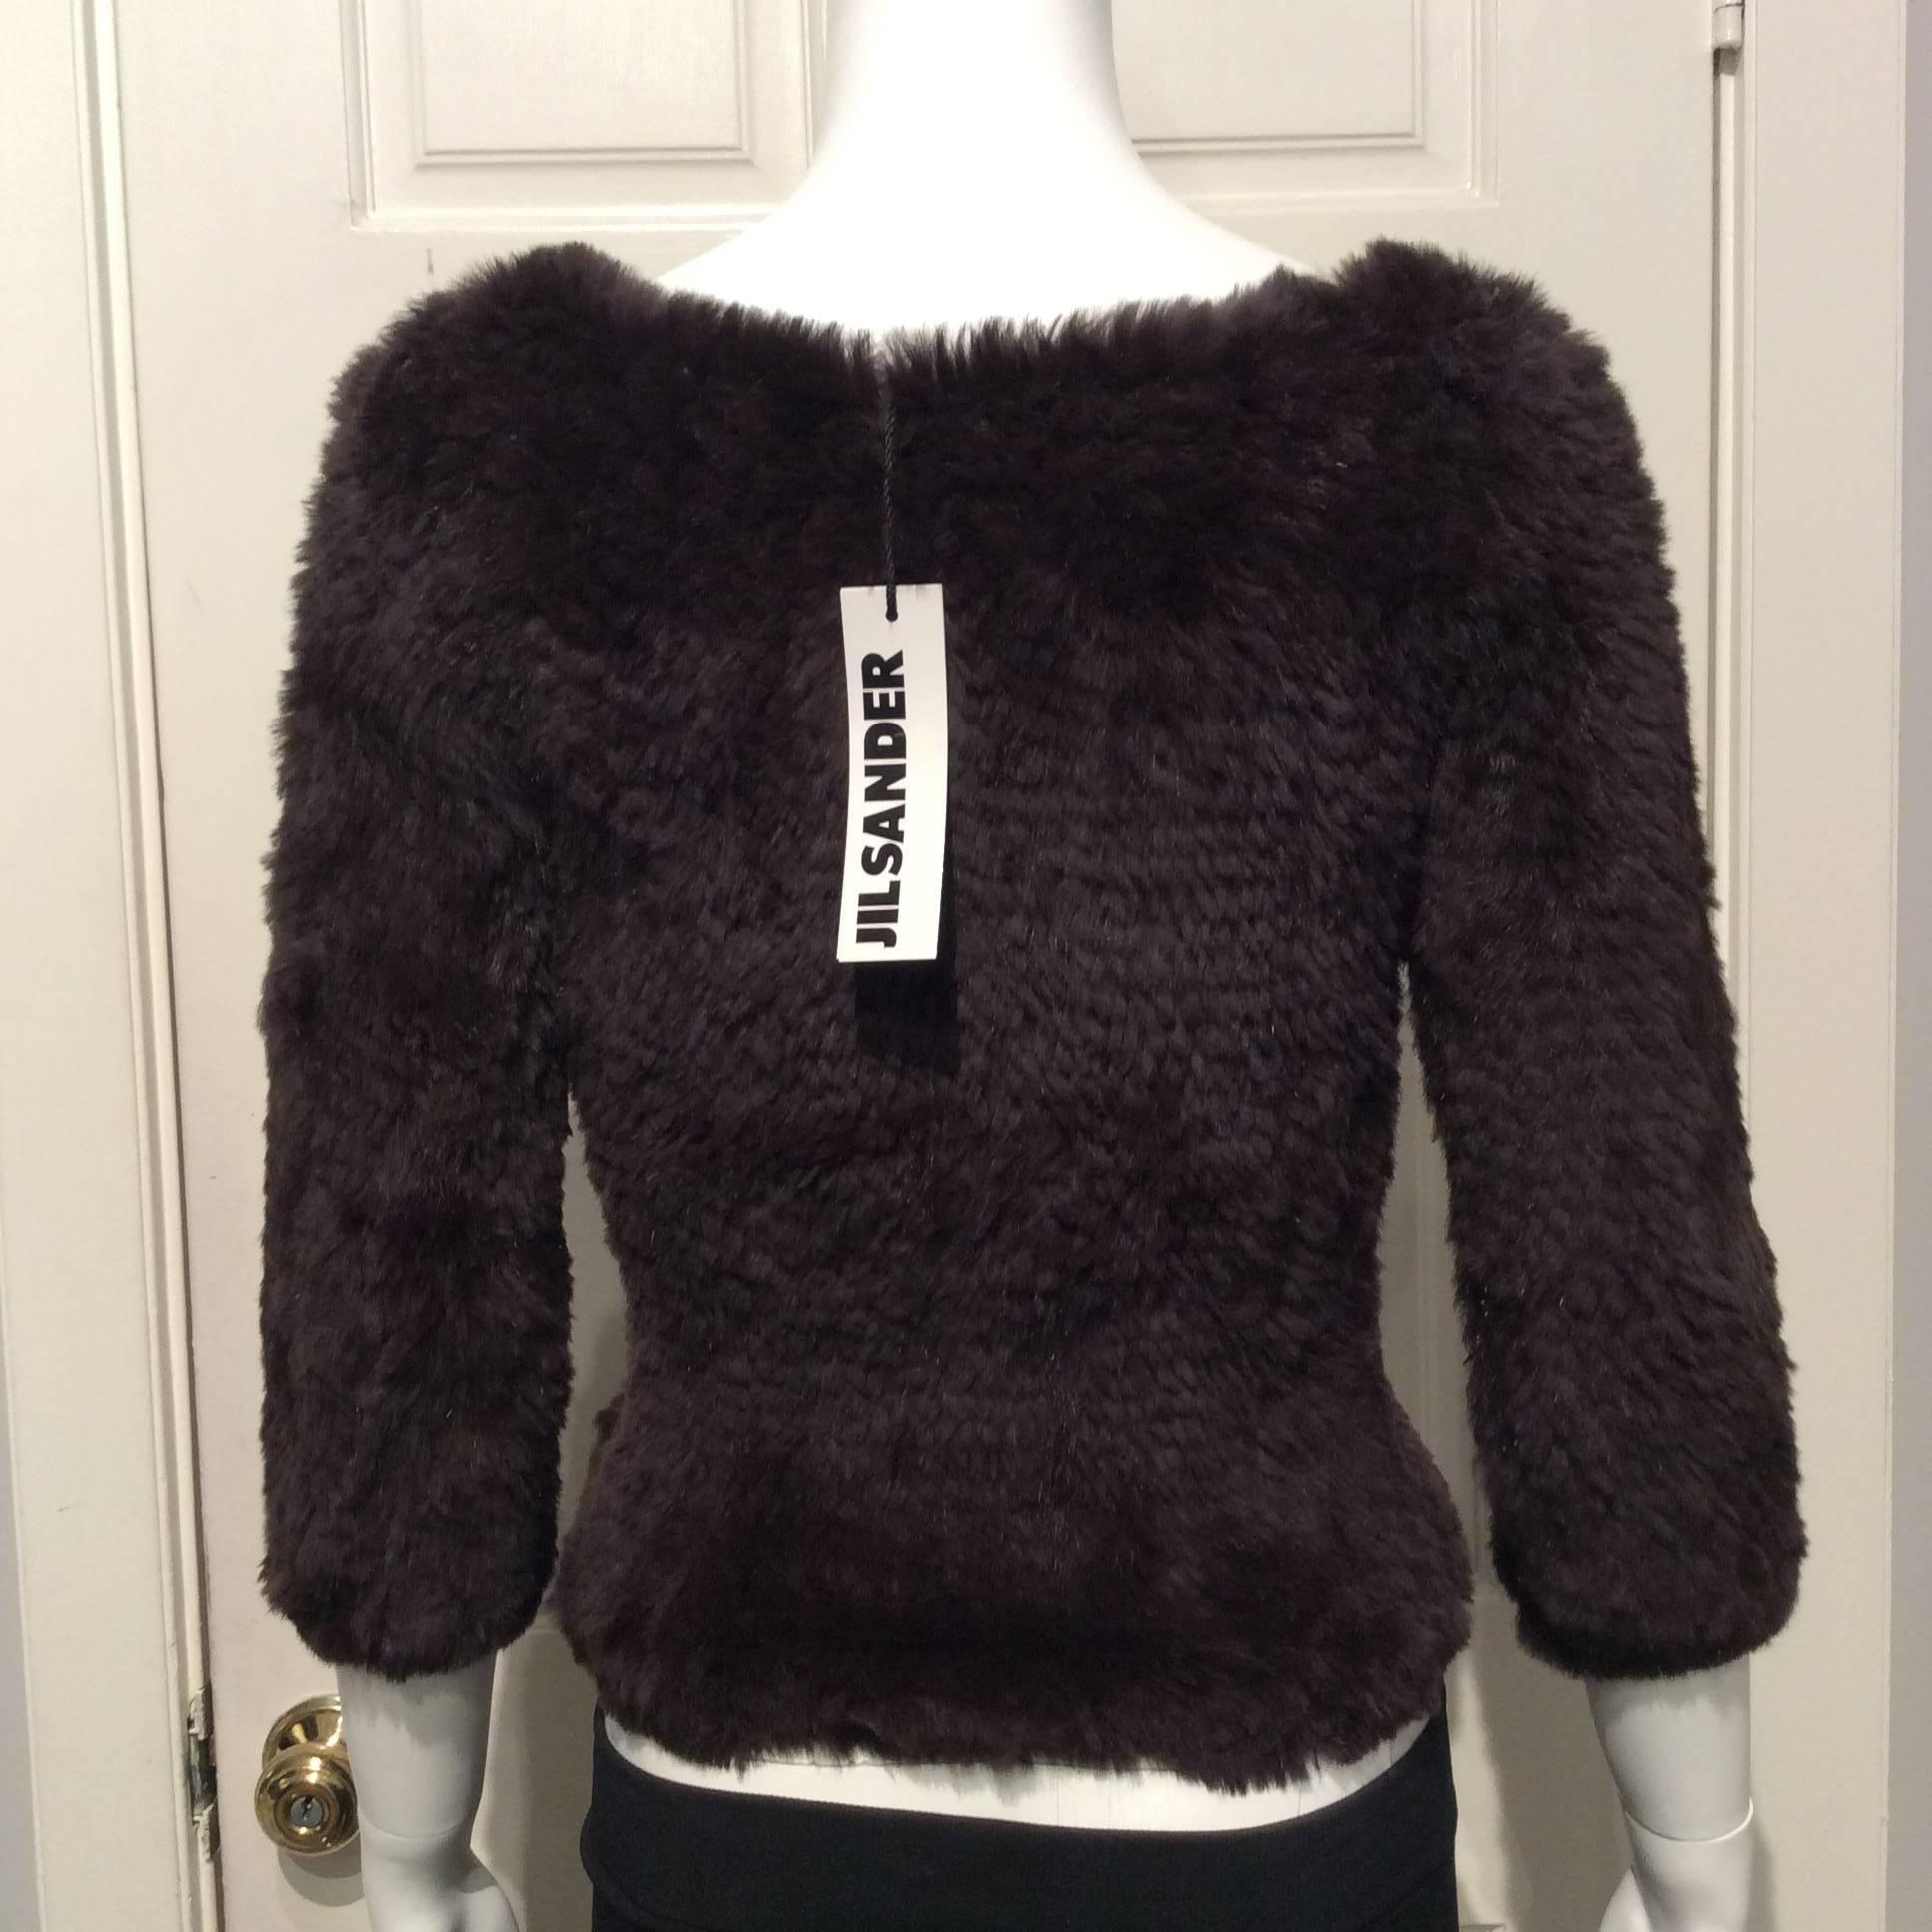 Jill Sander softest sweater in chocolate brown rabbit fur with a slight boat neck and 3/4 length sleeves.
This item is brand new with tags.